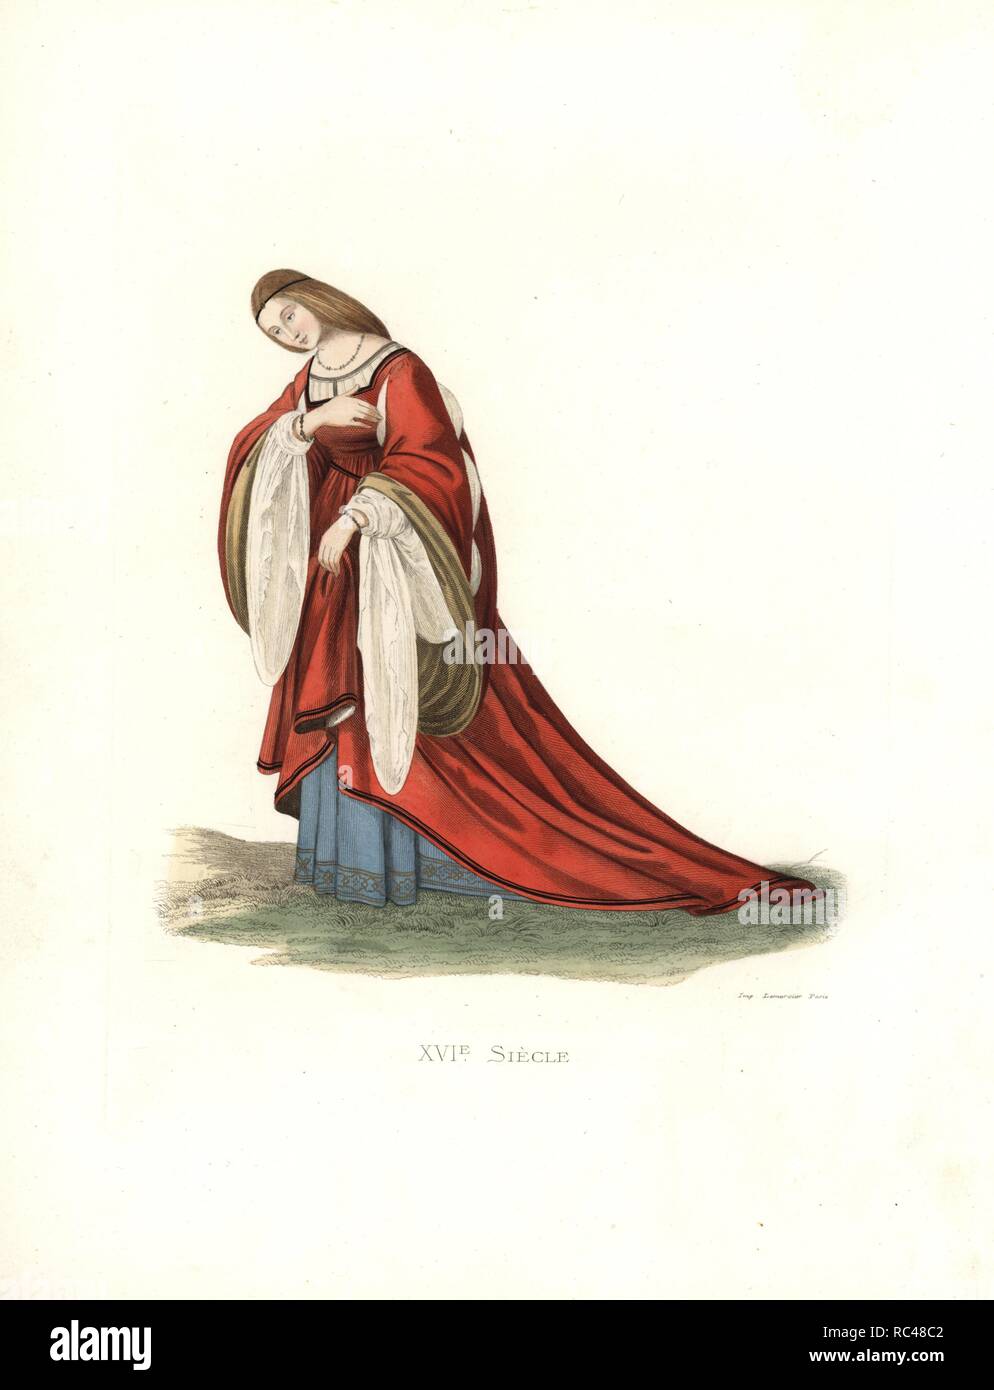 Isabella d'Este, Countess of Mantua (1474-1539) Scarlet dress with train, gathered at front to show blue underdress, puffed muslin sleeves. From a painting by Lorenzo Costa.. Handcolored illustration by E. Lechevallier-Chevignard, lithographed by A. Didier, L. Flameng, F. Laguillermie, from Georges Duplessis's 'Costumes historiques des XVIe, XVIIe et XVIIIe siecles' (Historical costumes of the 16th, 17th and 18th centuries), Paris 1867. The book was a continuation of the series on the costumes of the 12th to 15th centuries published by Camille Bonnard and Paul Mercuri from 1830. Georges Duples Stock Photo